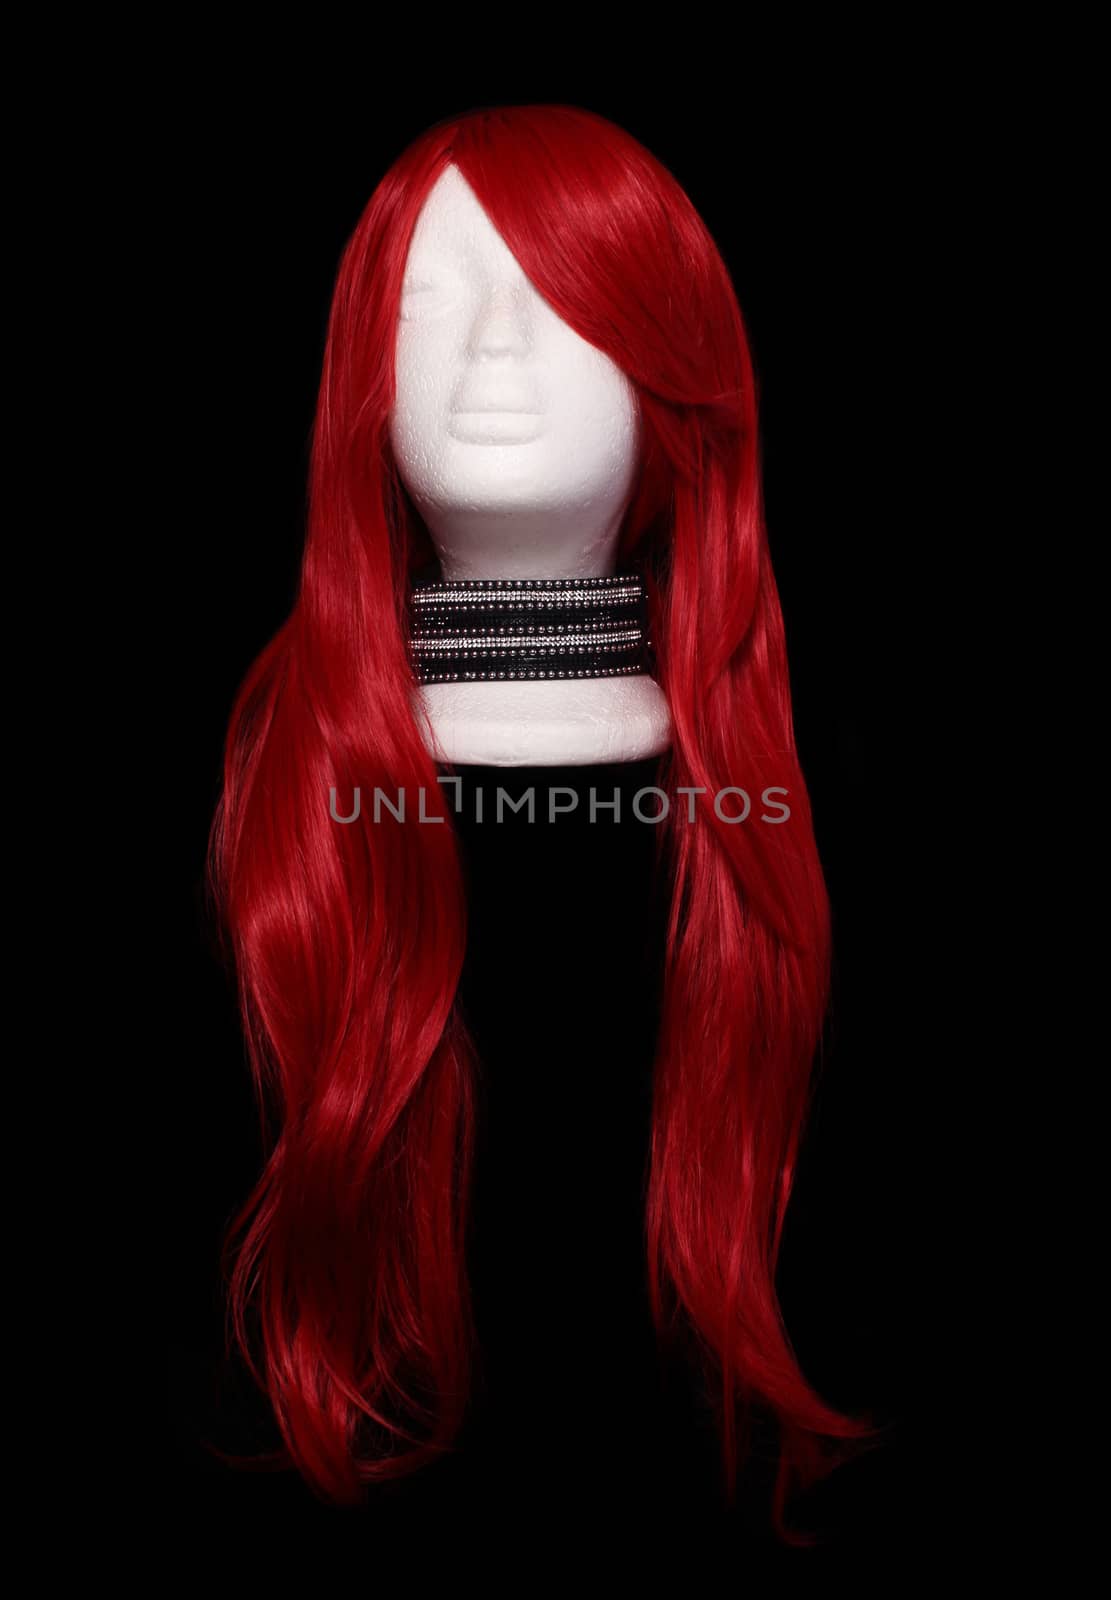 Red Orange Anime Style Wig on Black by Marti157900